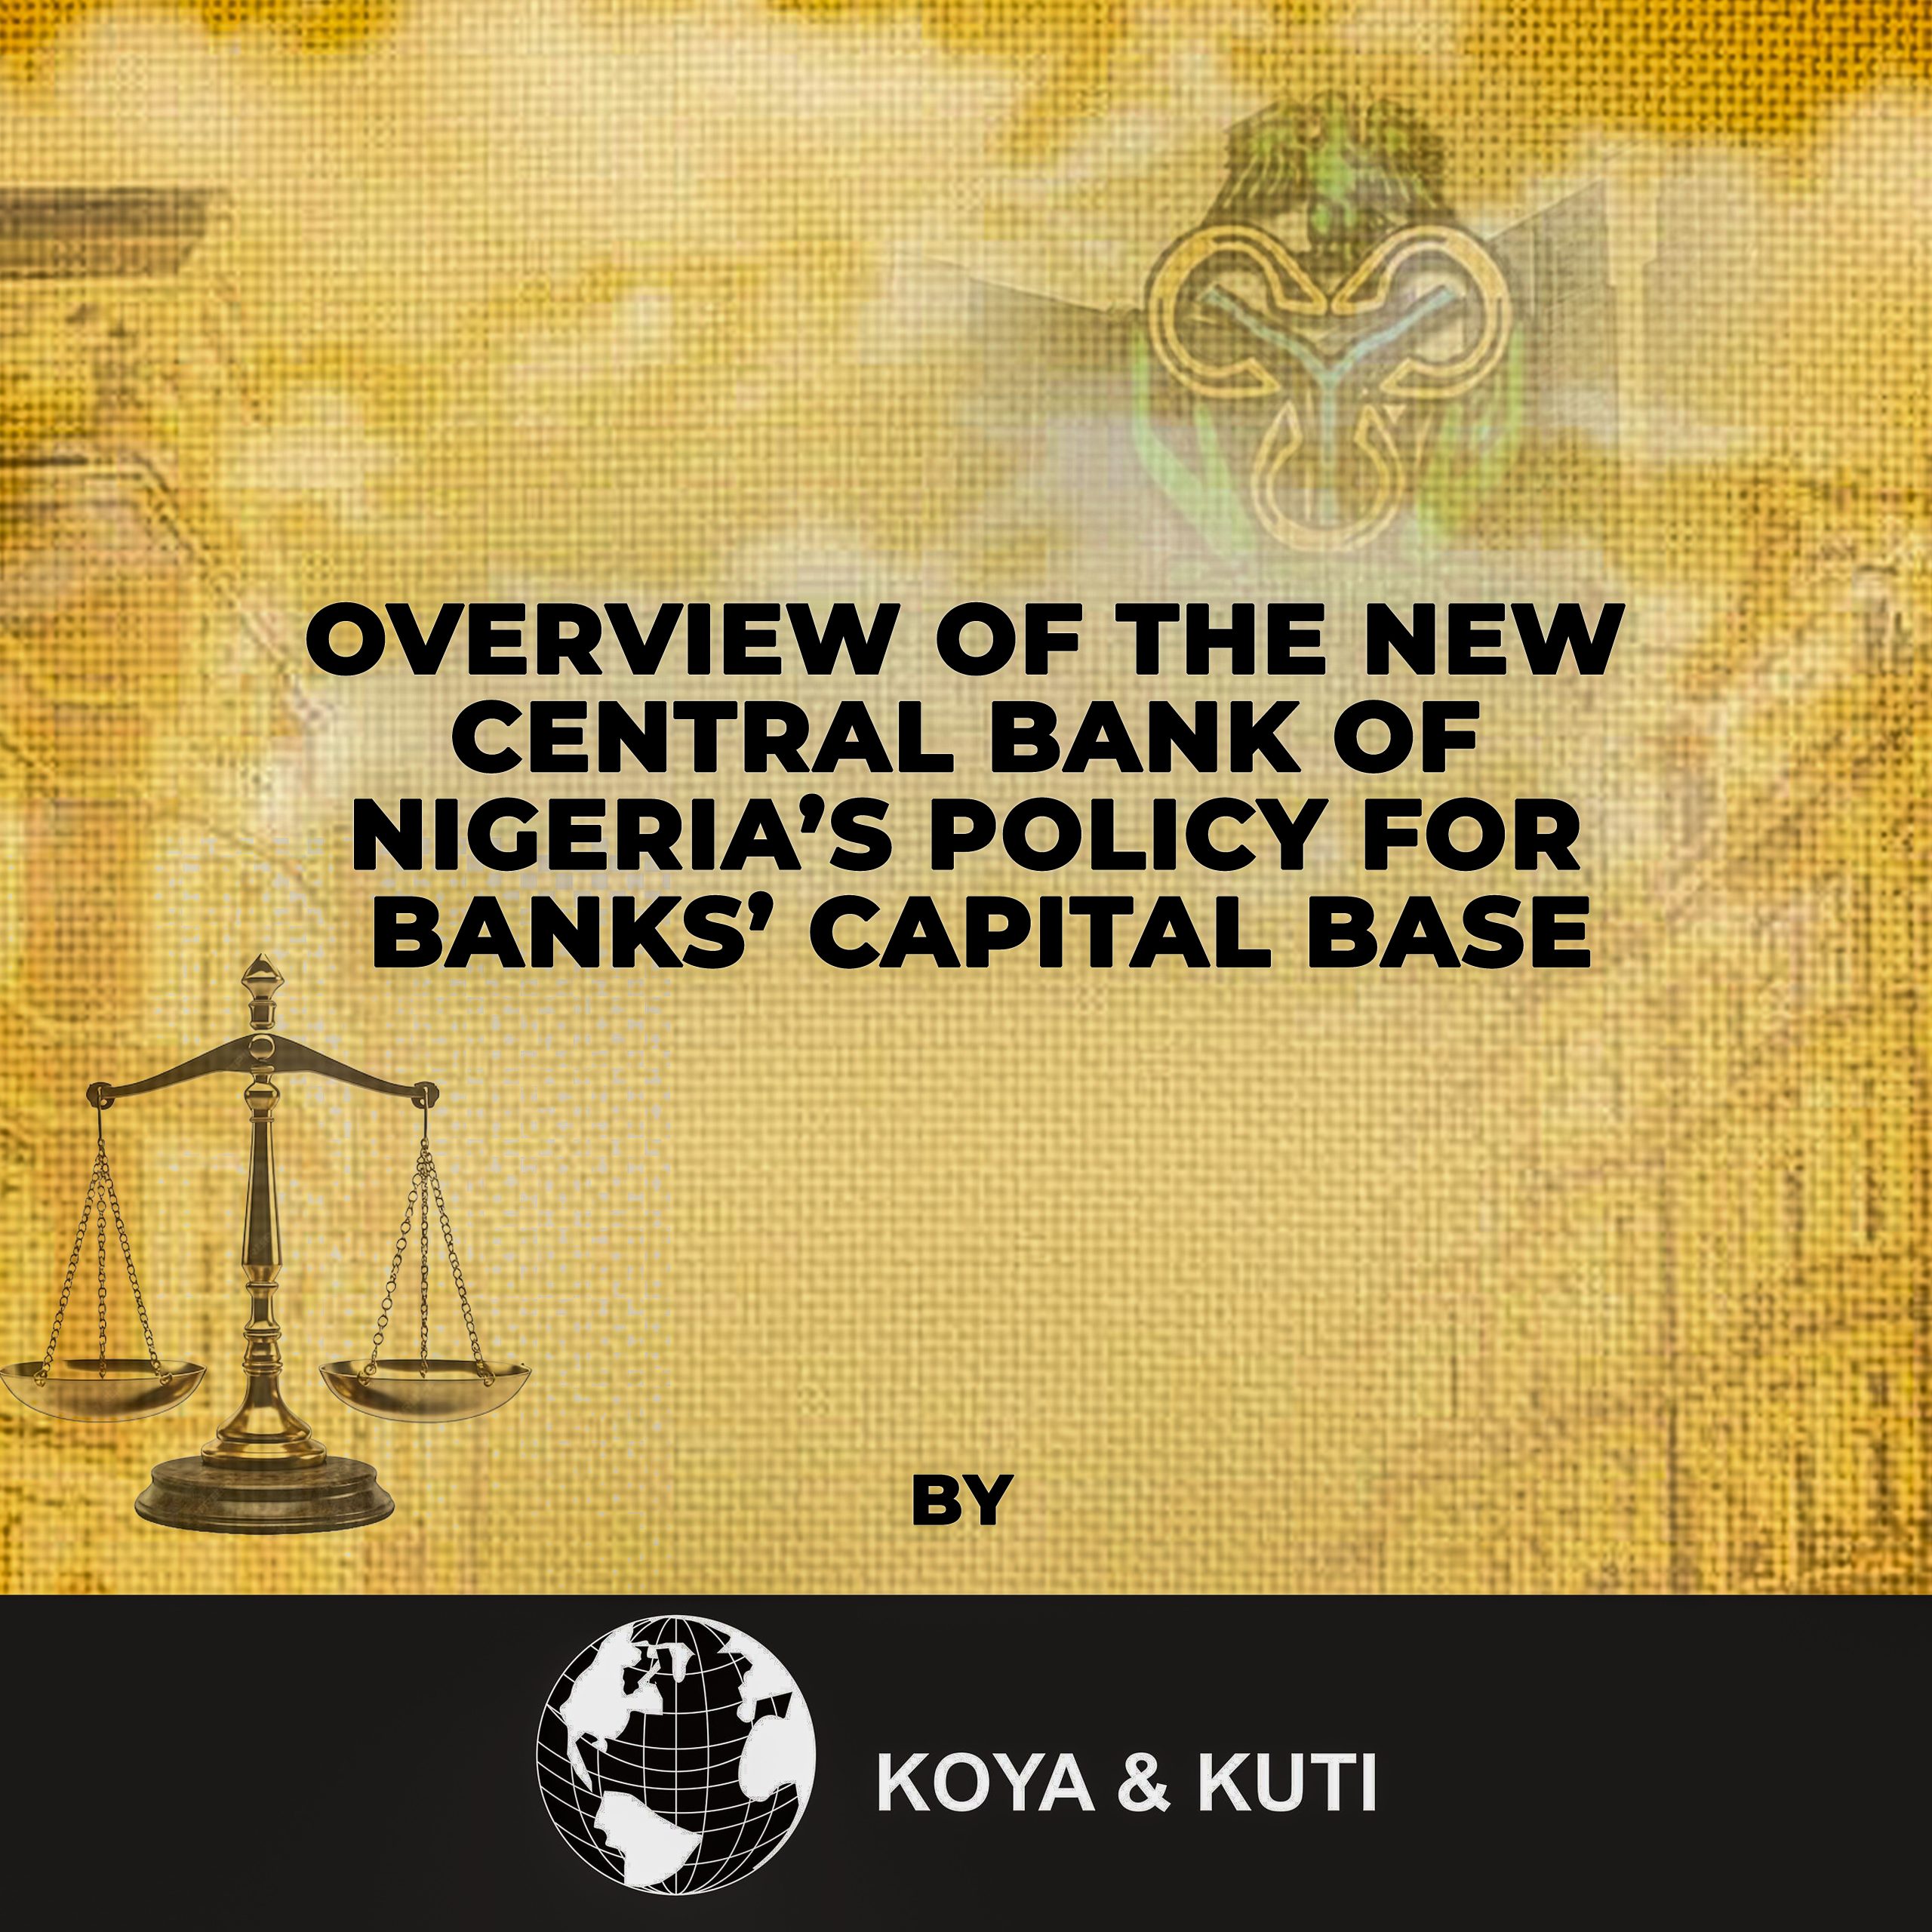 OVERVIEW OF THE NEW CENTRAL BANK OF NIGERIA’S POLICY FOR BANKS’ CAPITAL BASE